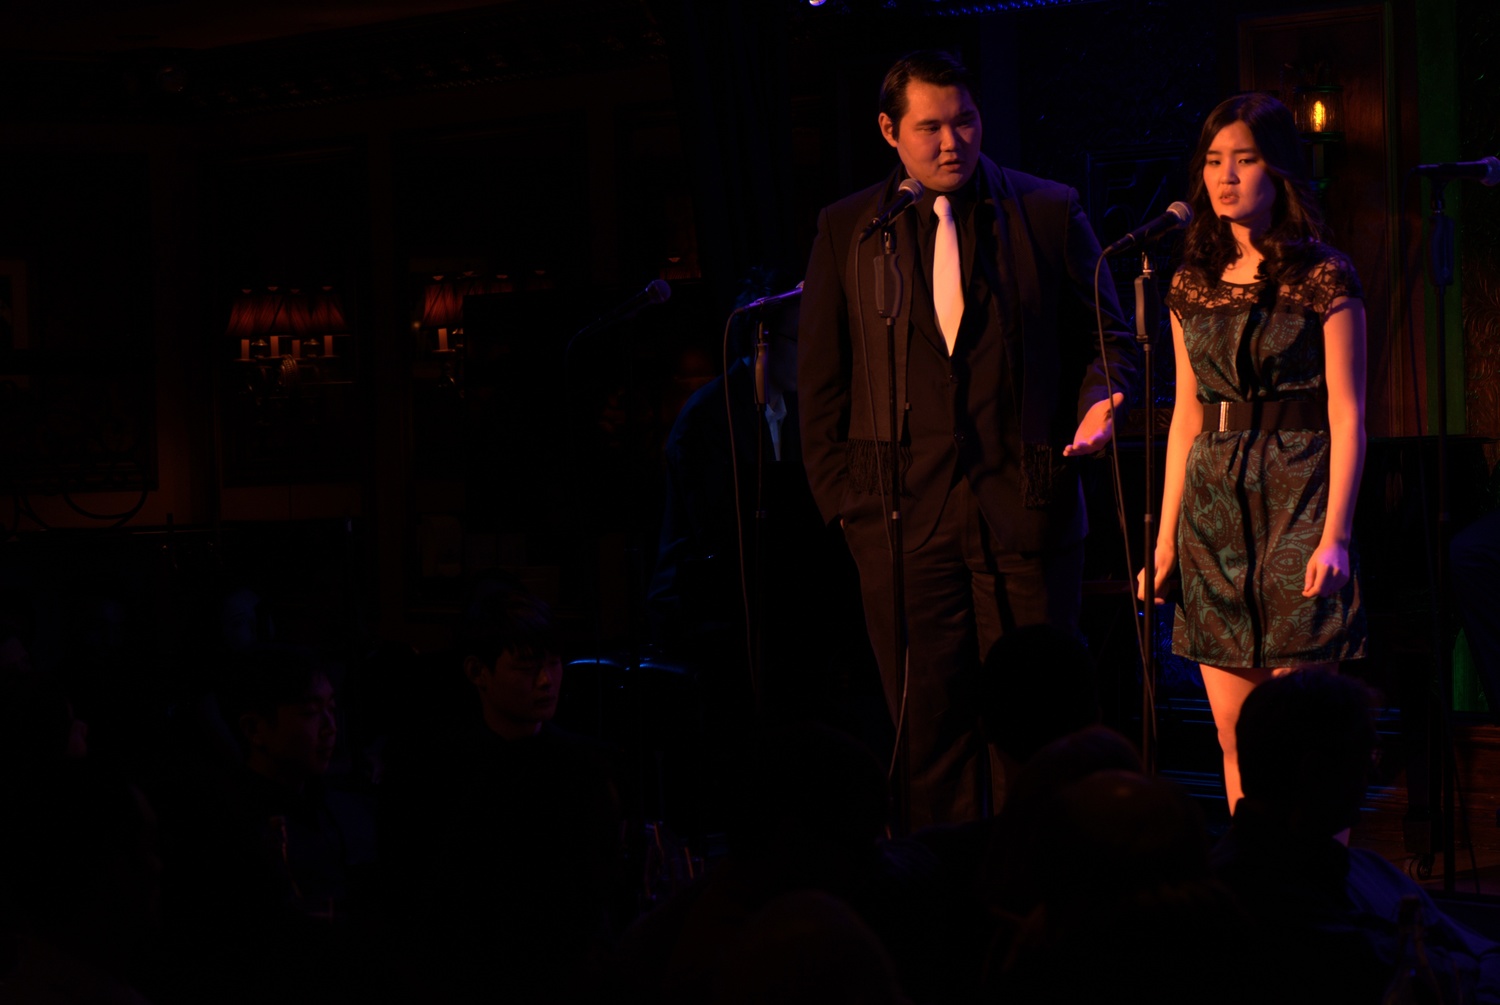 Some of the pictures from 54 Below concert. 1